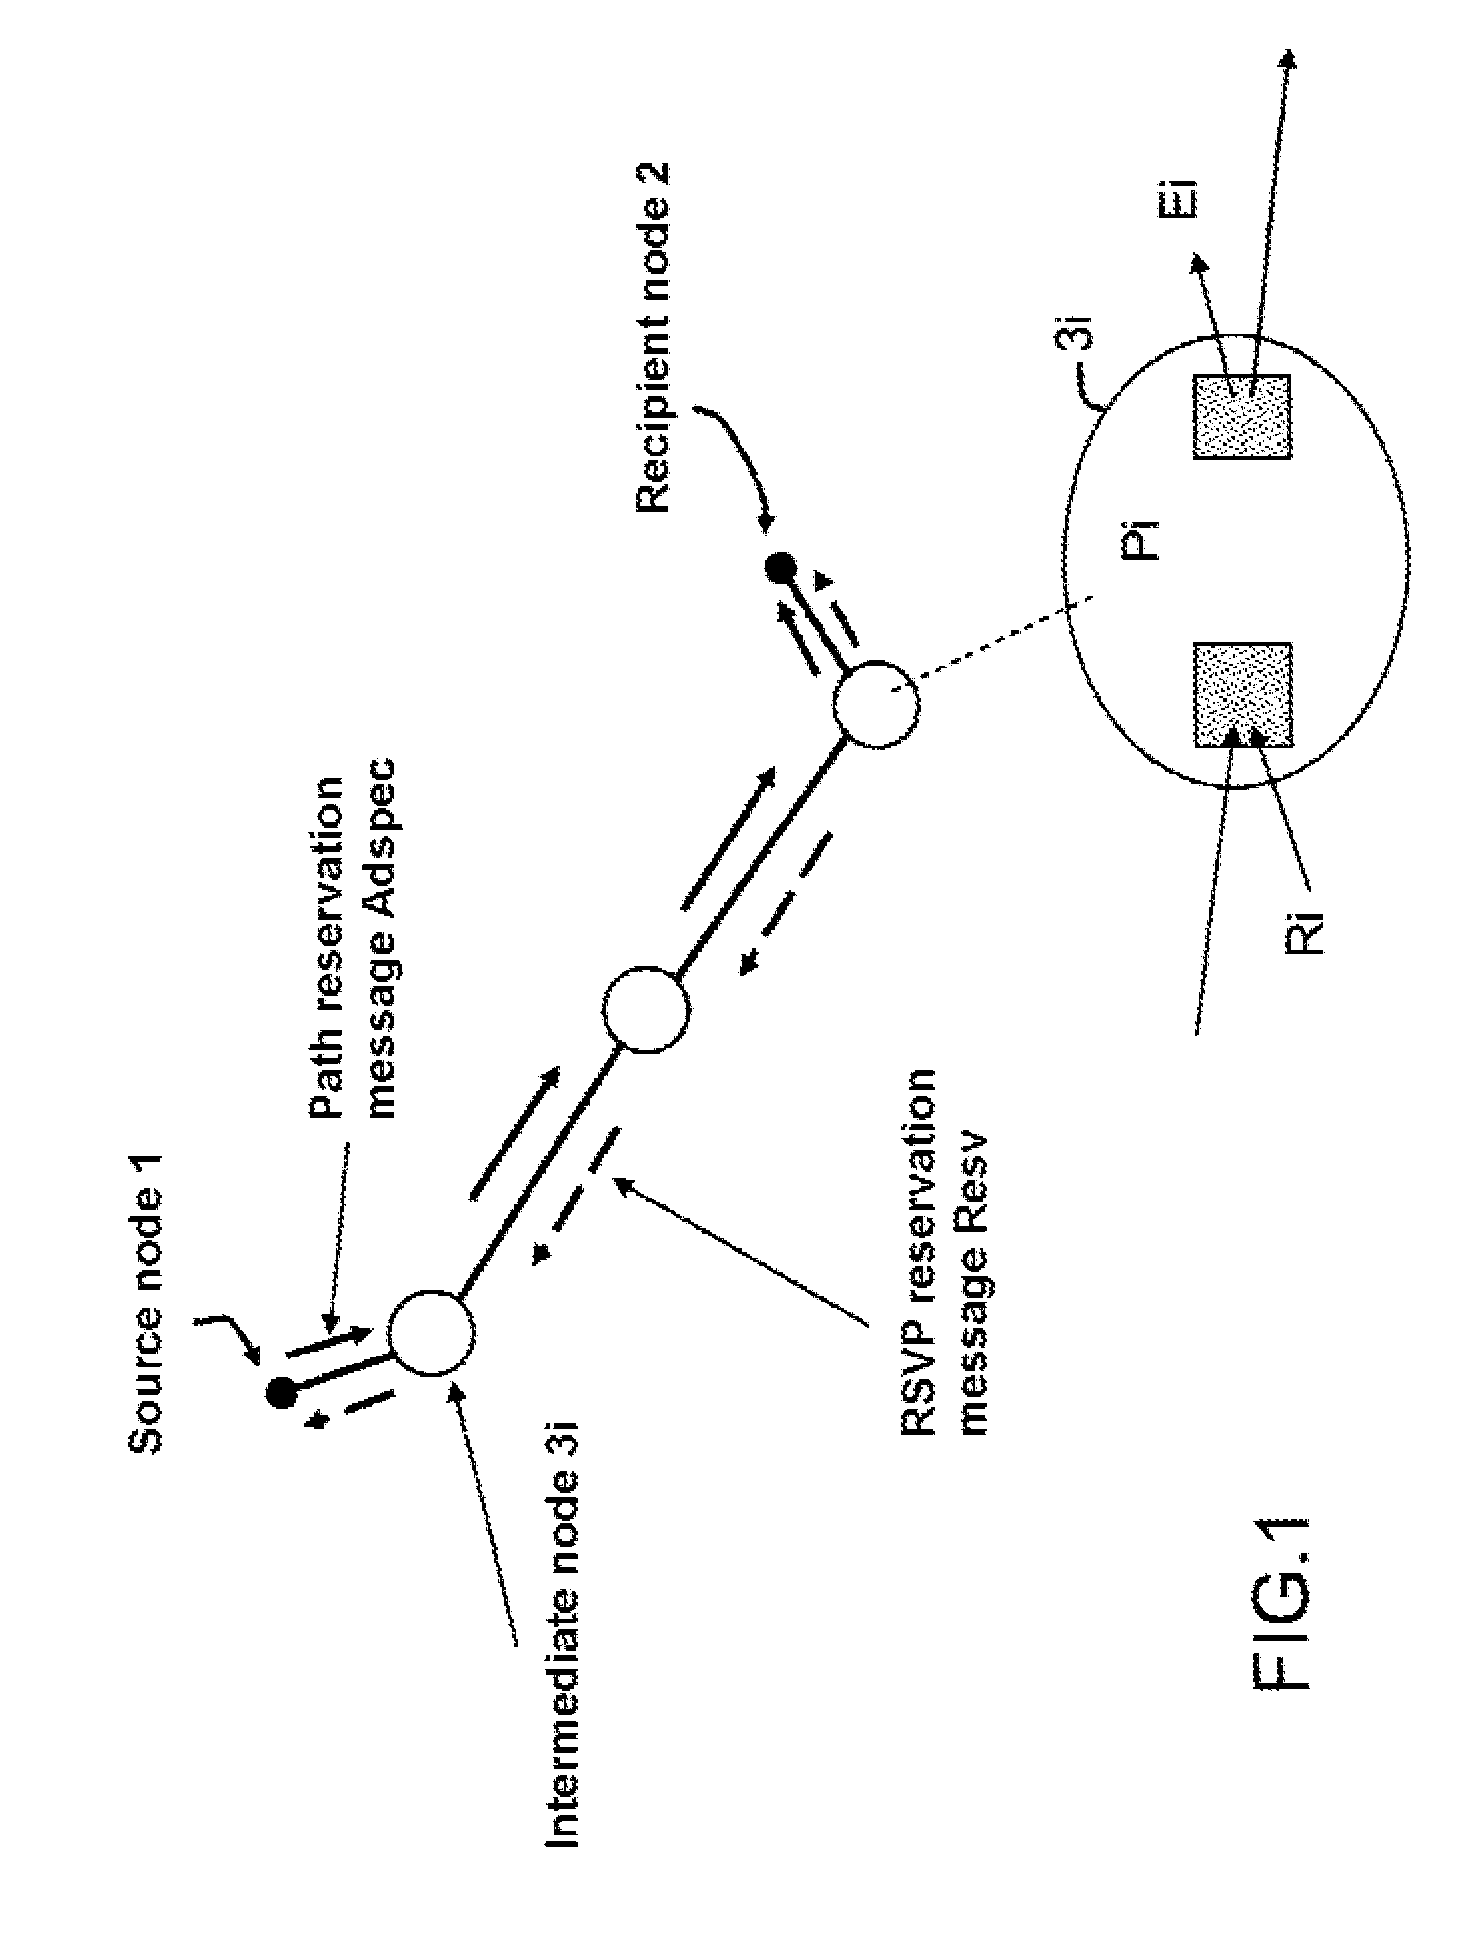 Method of reservation with guarantee of latency and of bit rate in a time slot dynamic allocation network